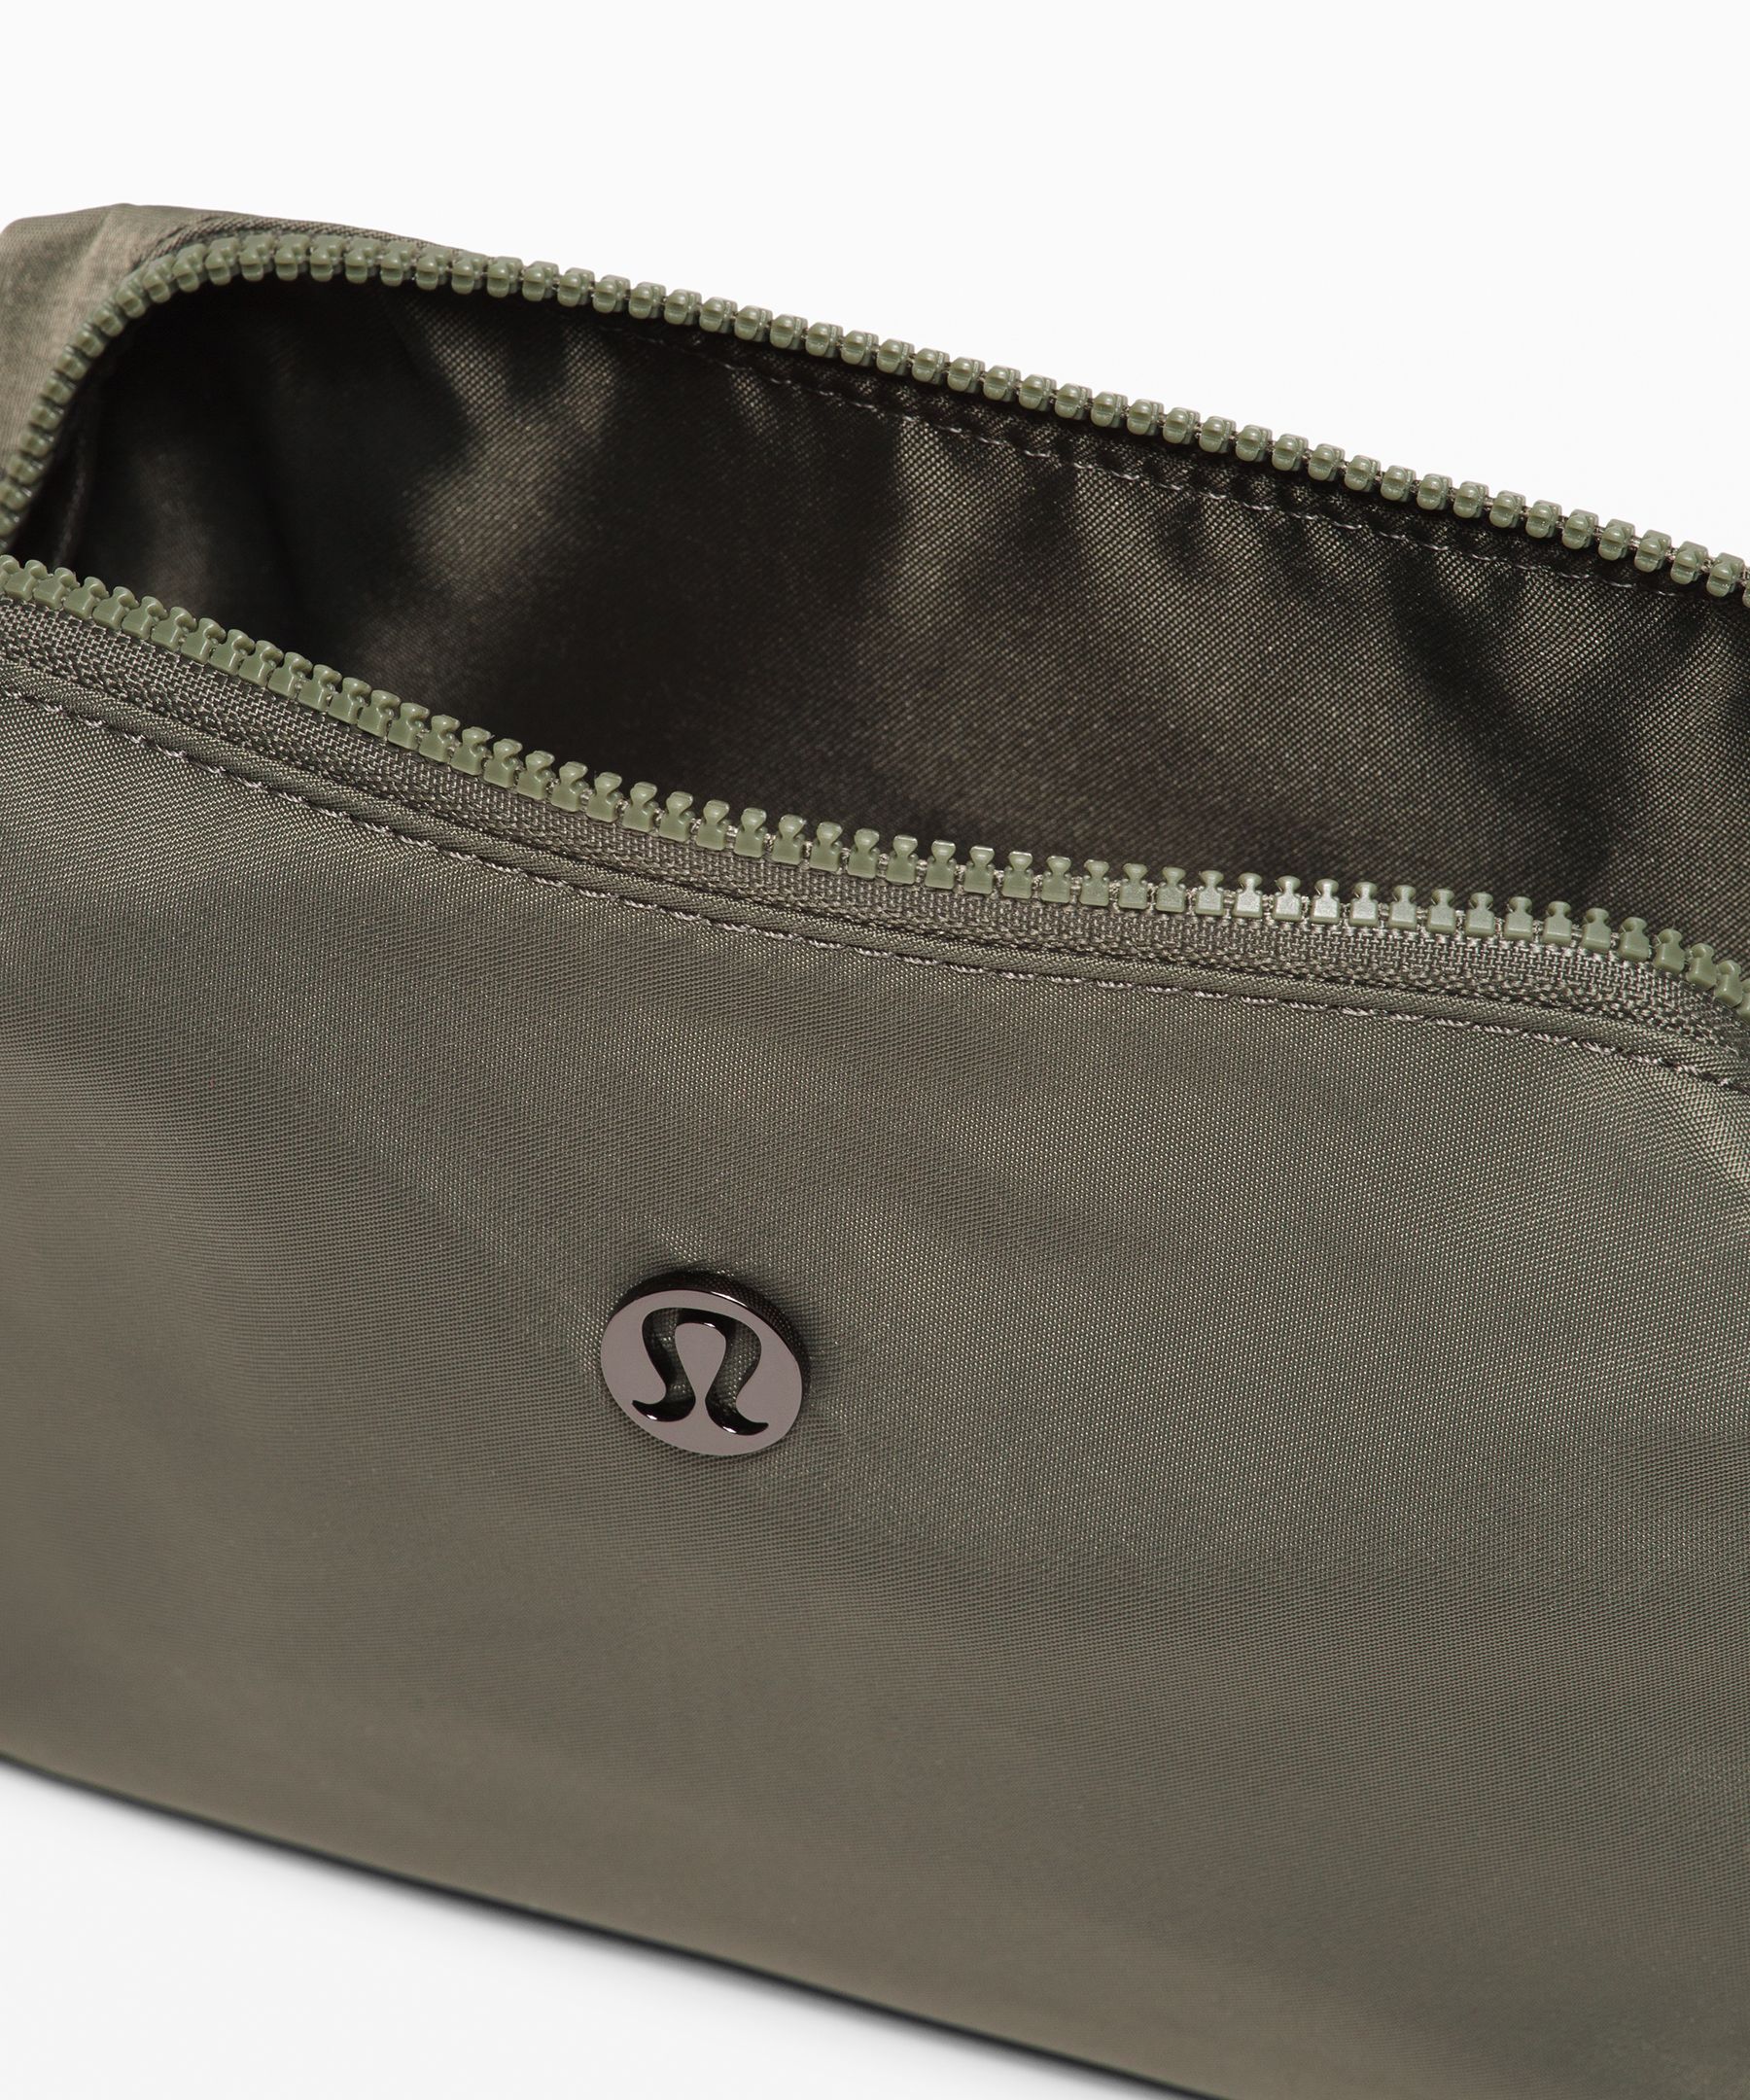 lululemon all your small things pouch